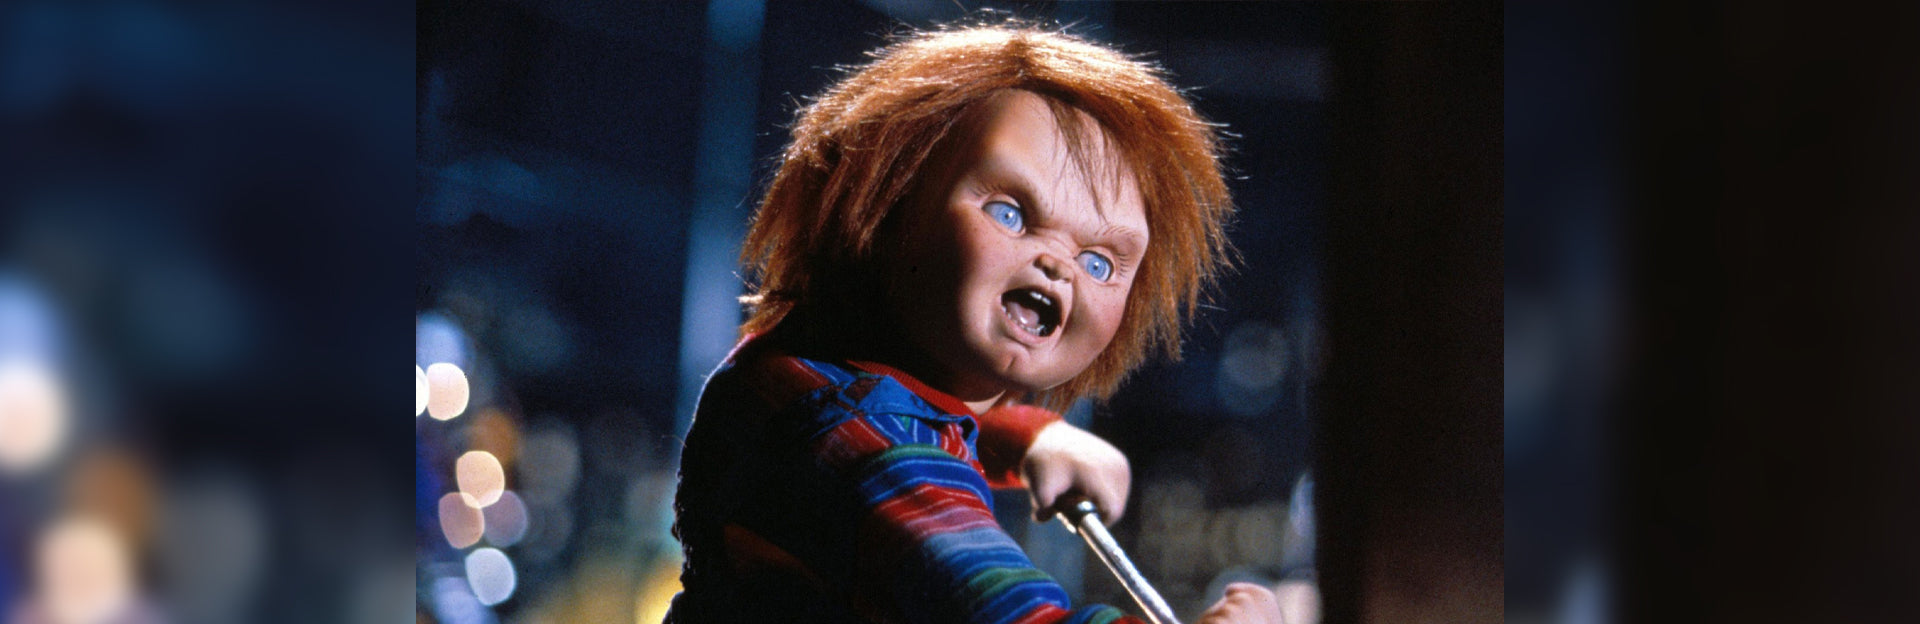 How Did Chucky Turn Into A Doll? (2023 Updated)